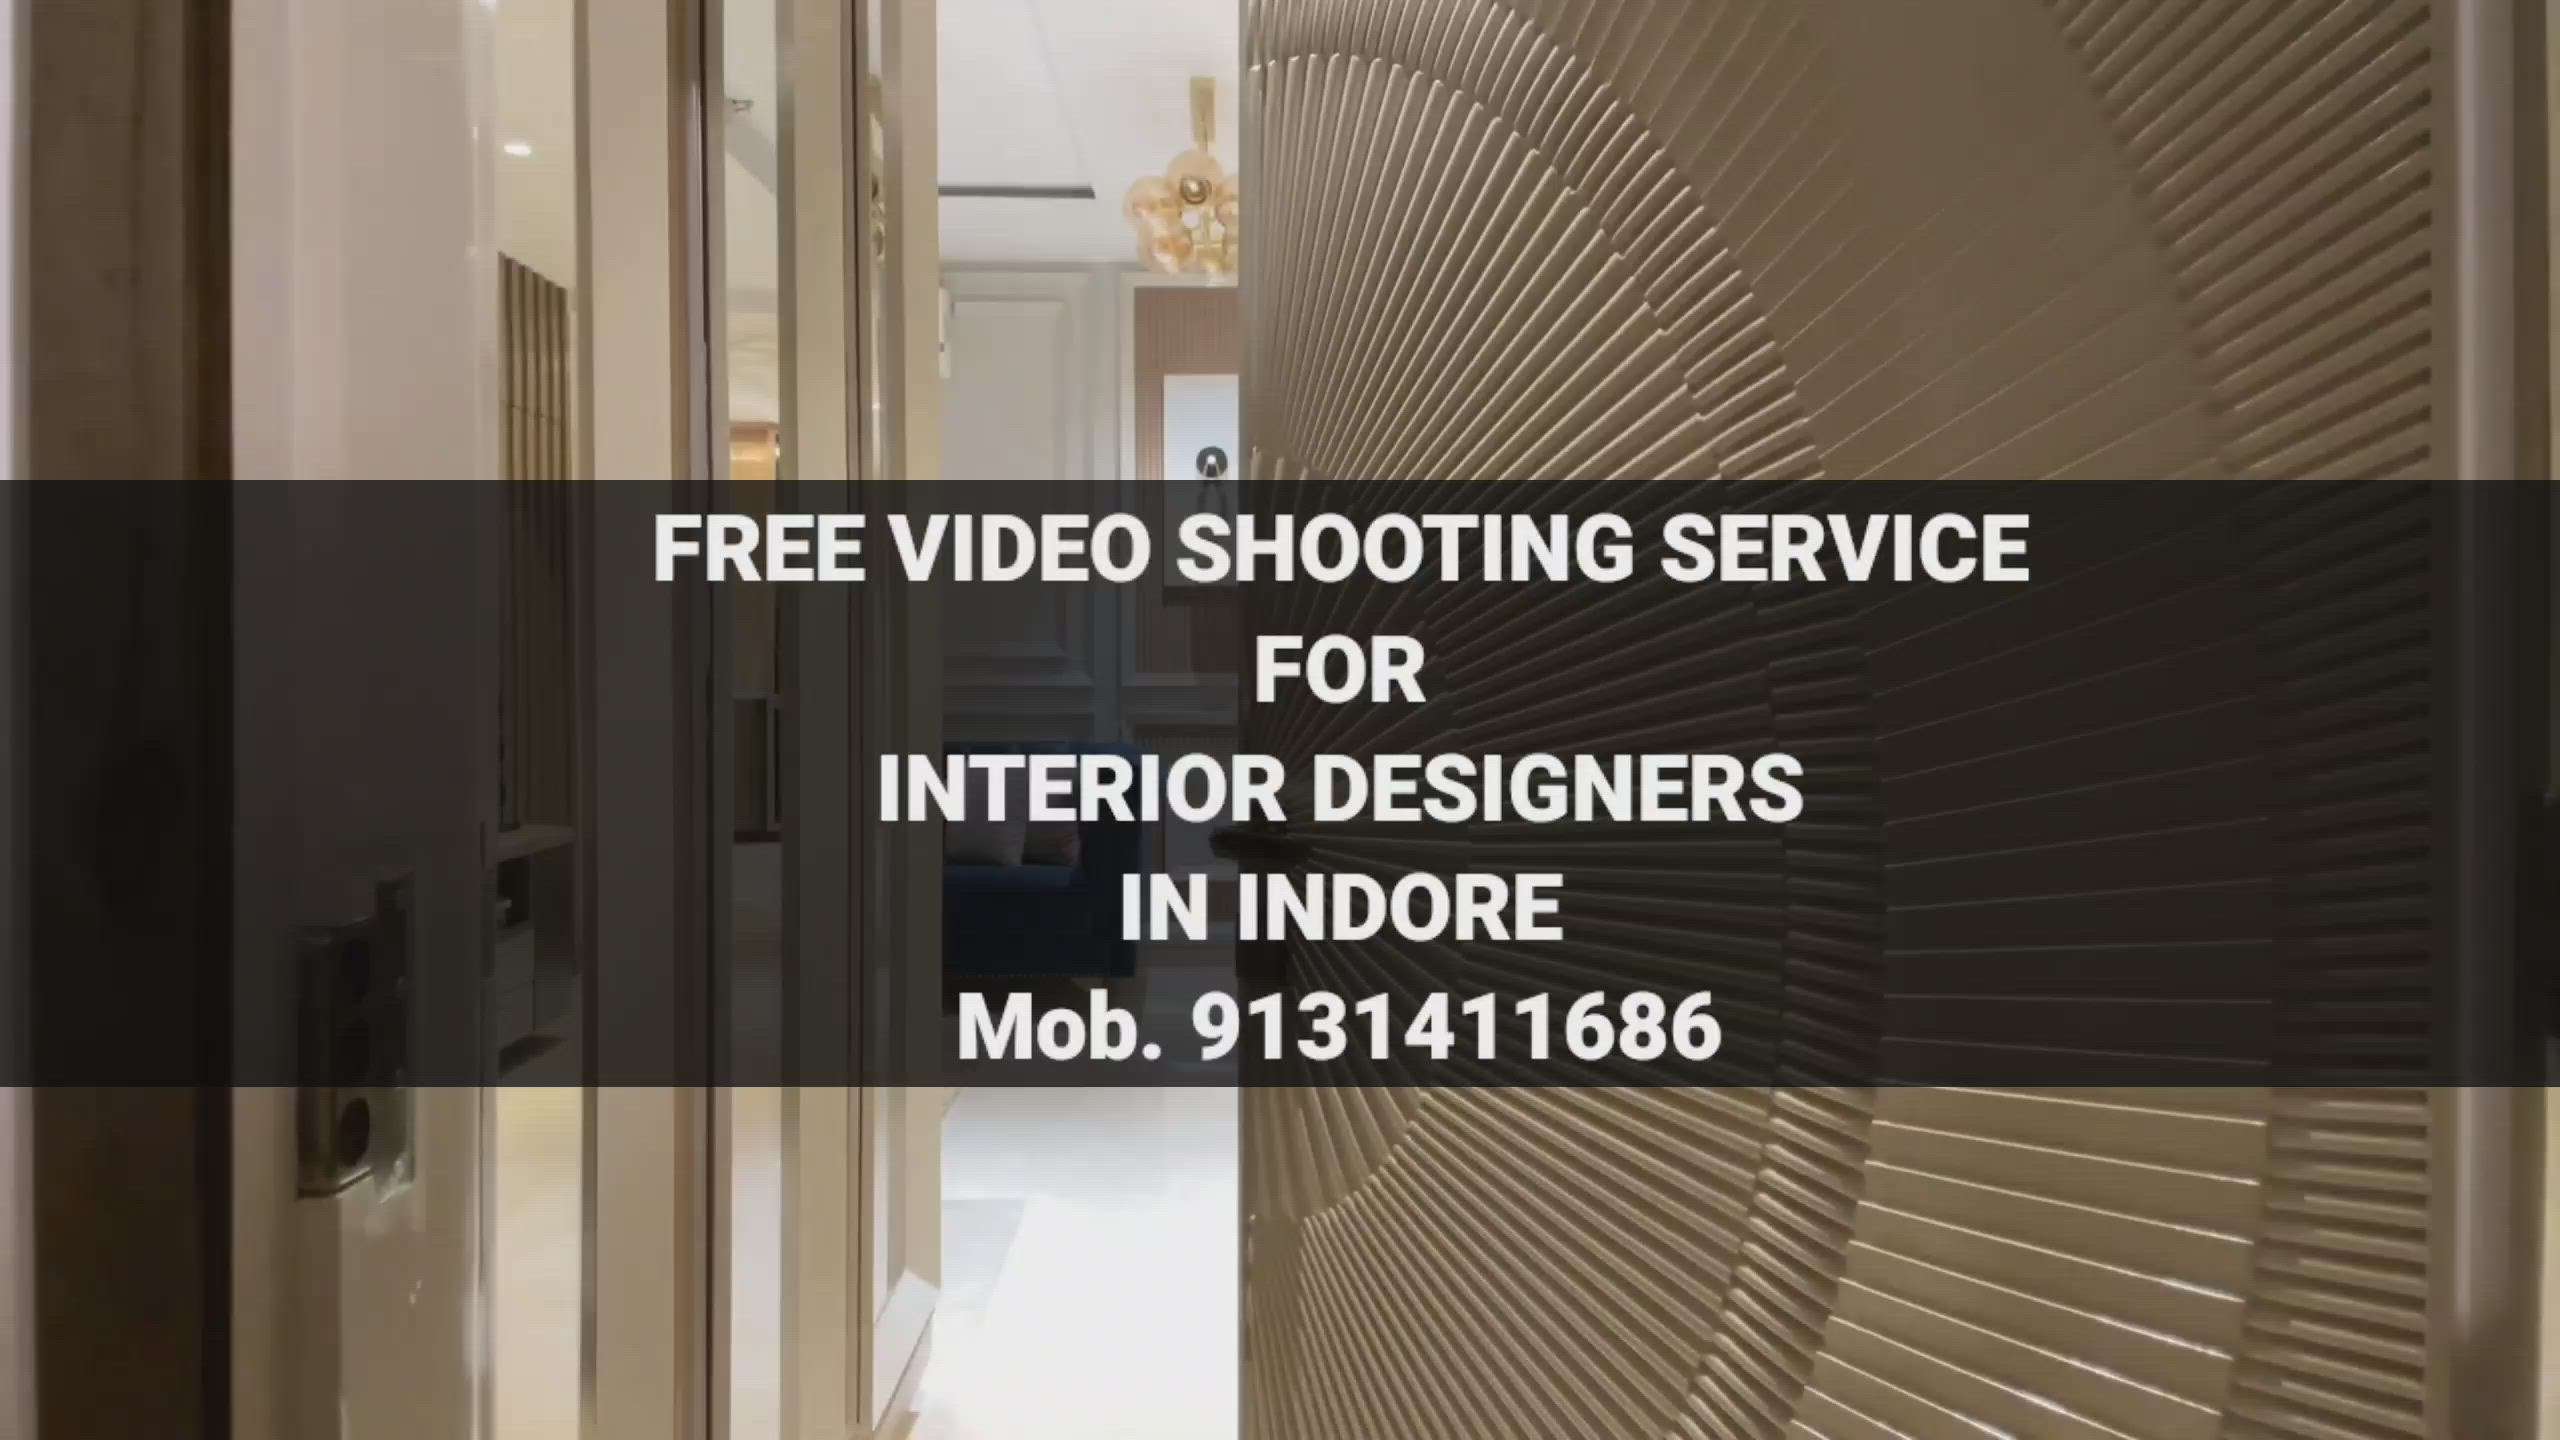 Living, Furniture, Home Decor, Bedroom, Kitchen, Bathroom Designs by Architect Mohit Suryawanshi, Indore | Kolo